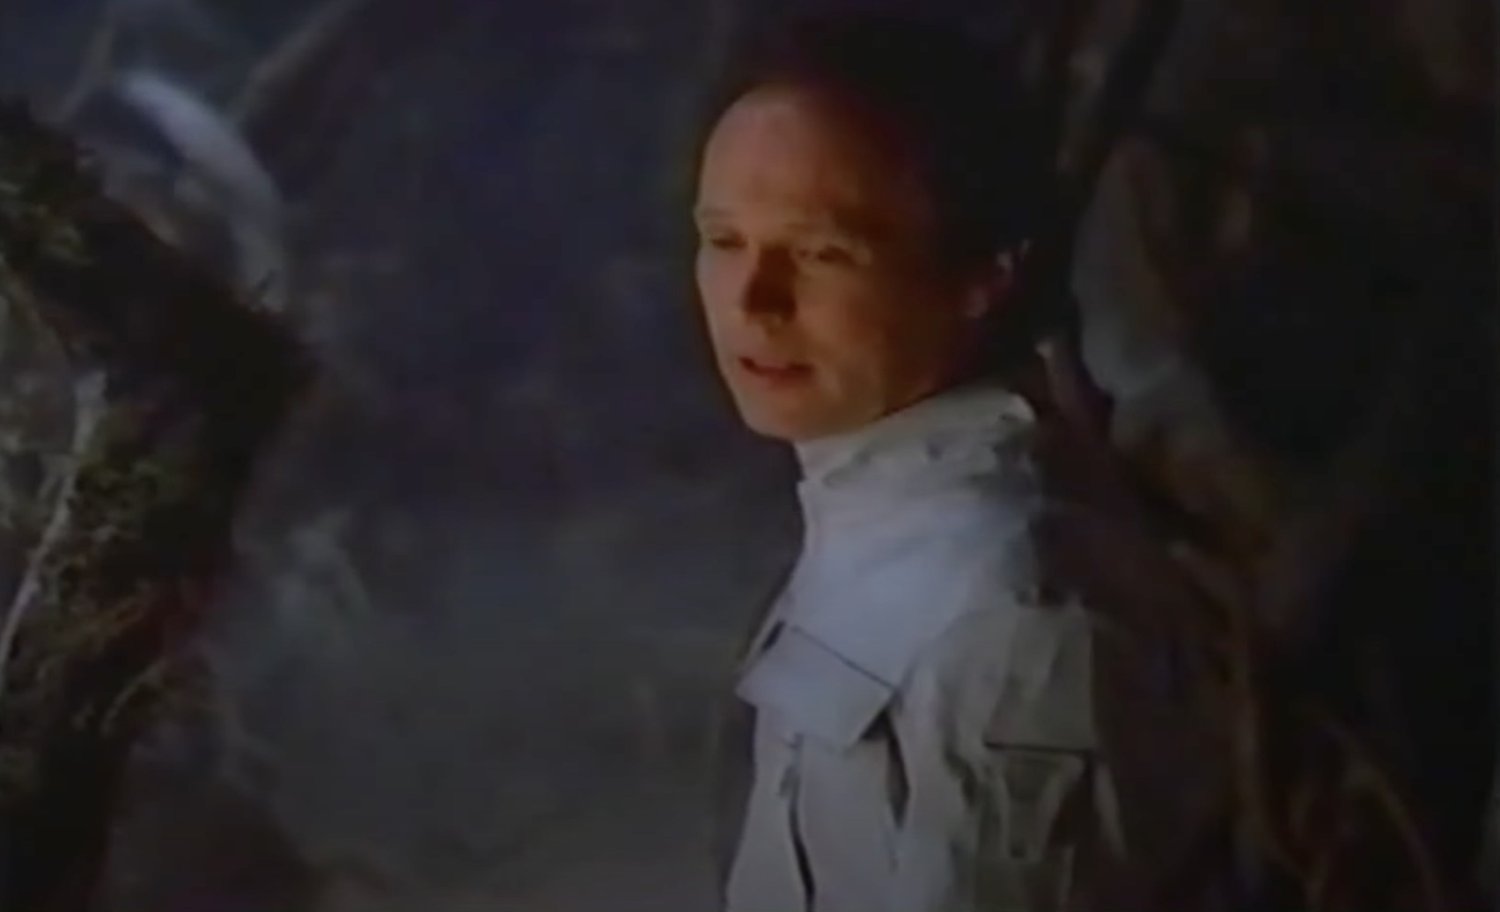 Billy Crystal's 1997 Academy Award Opening Was One of The Best Produced; Watch It!